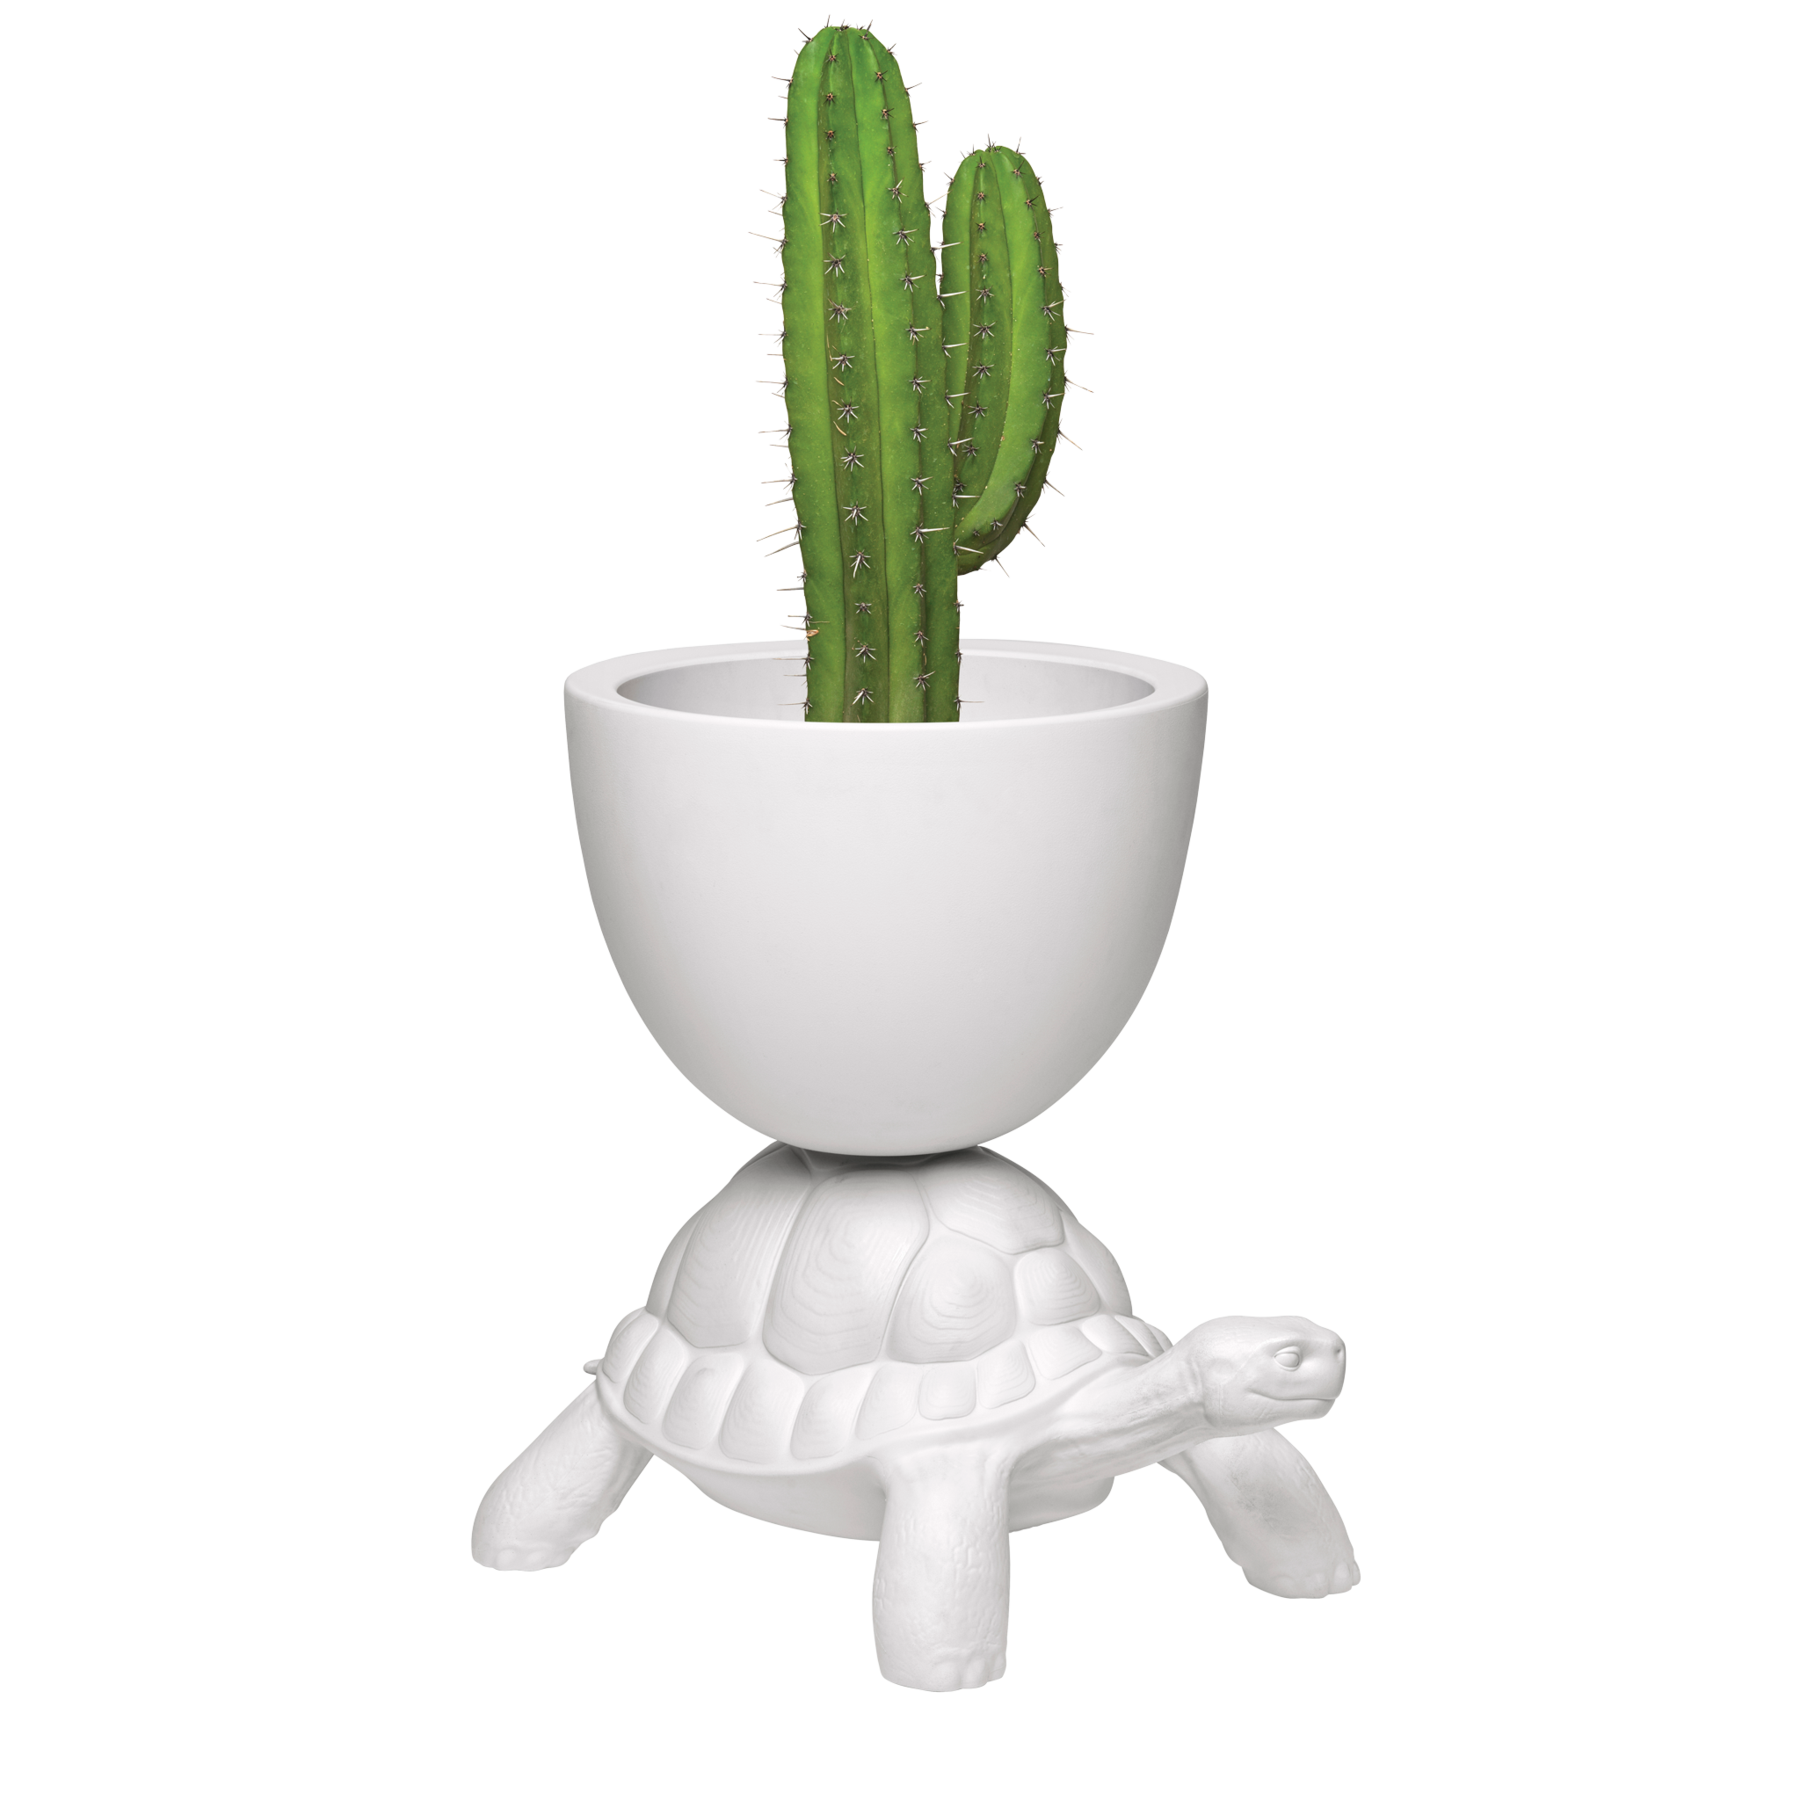 Qeeboo Turtle Carry Planter and Champagne Cooler - White